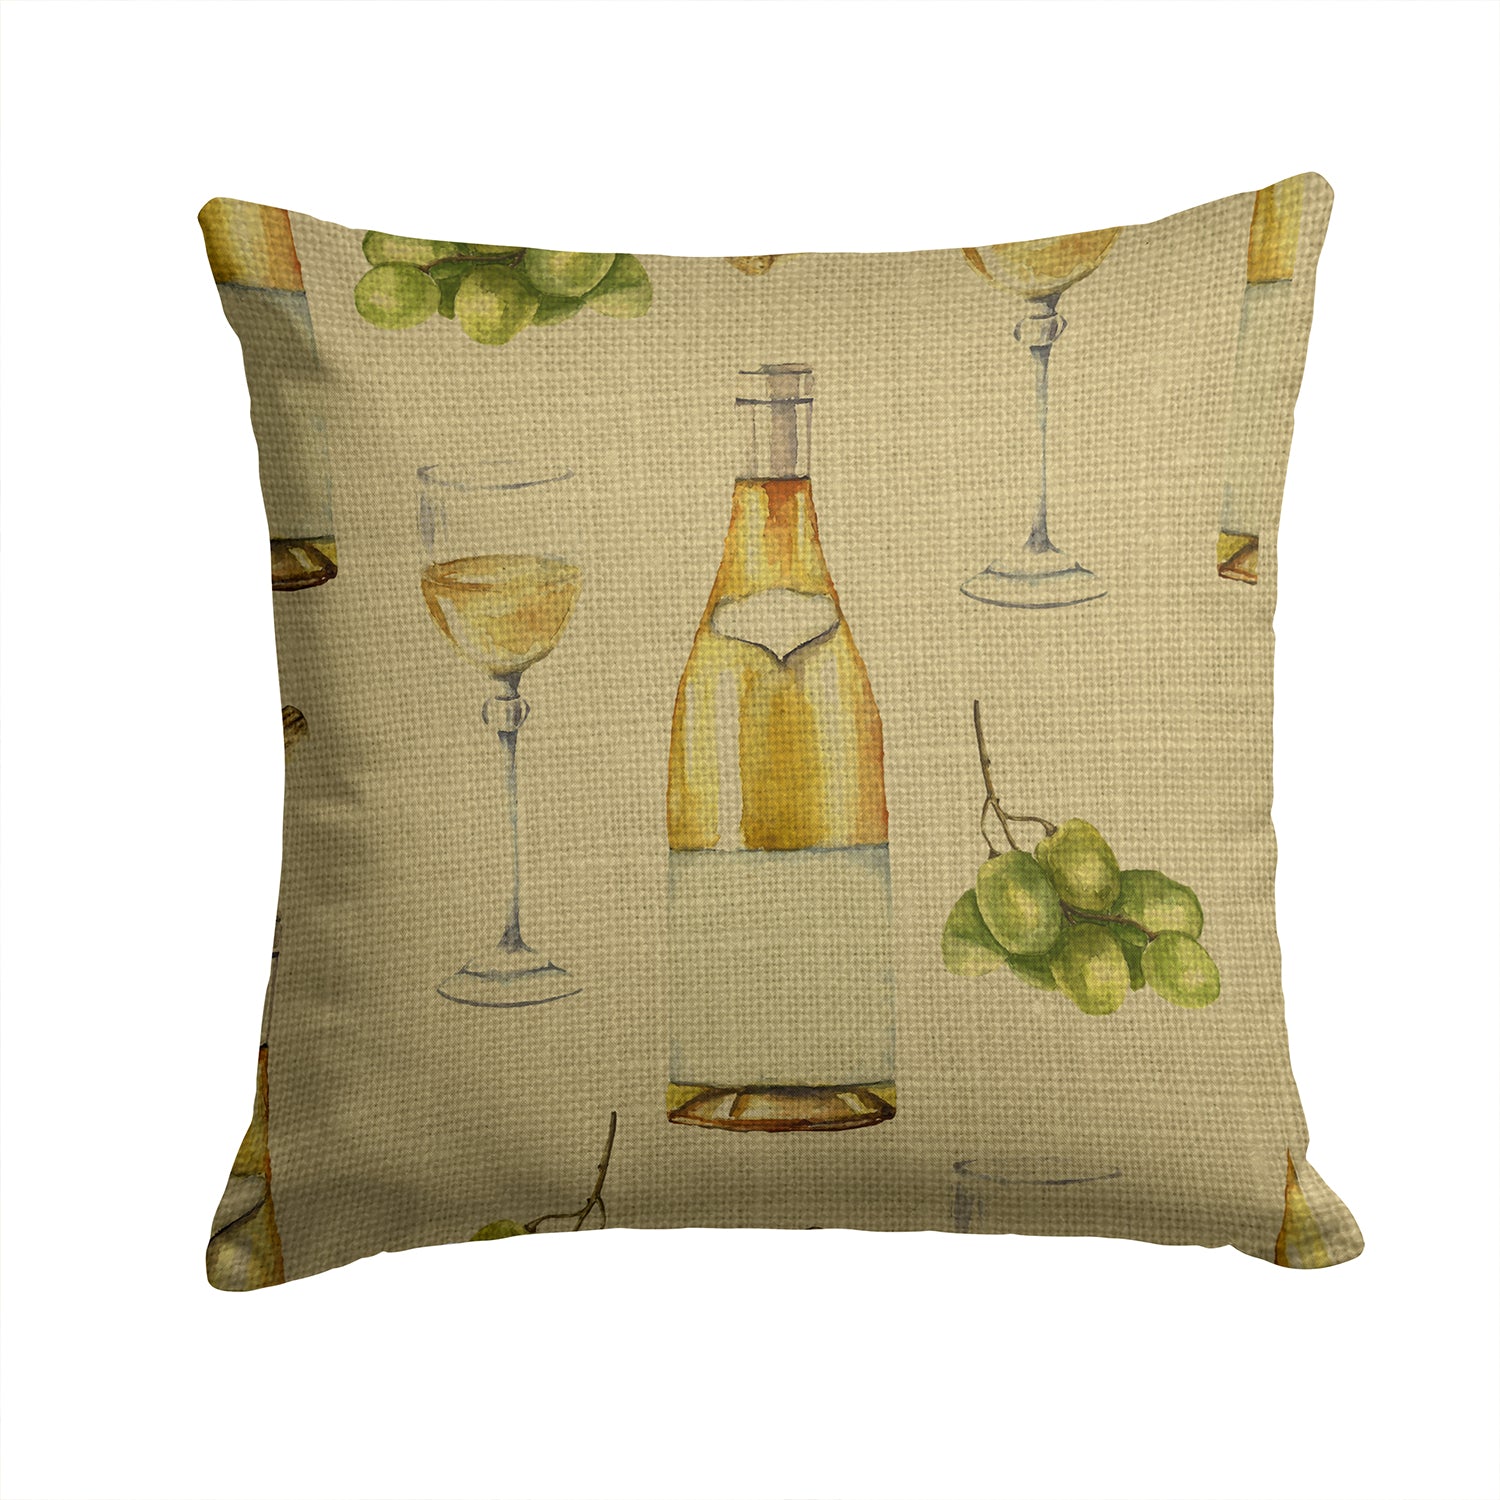 White Wine on Linen Fabric Decorative Pillow BB5194PW1414 - the-store.com